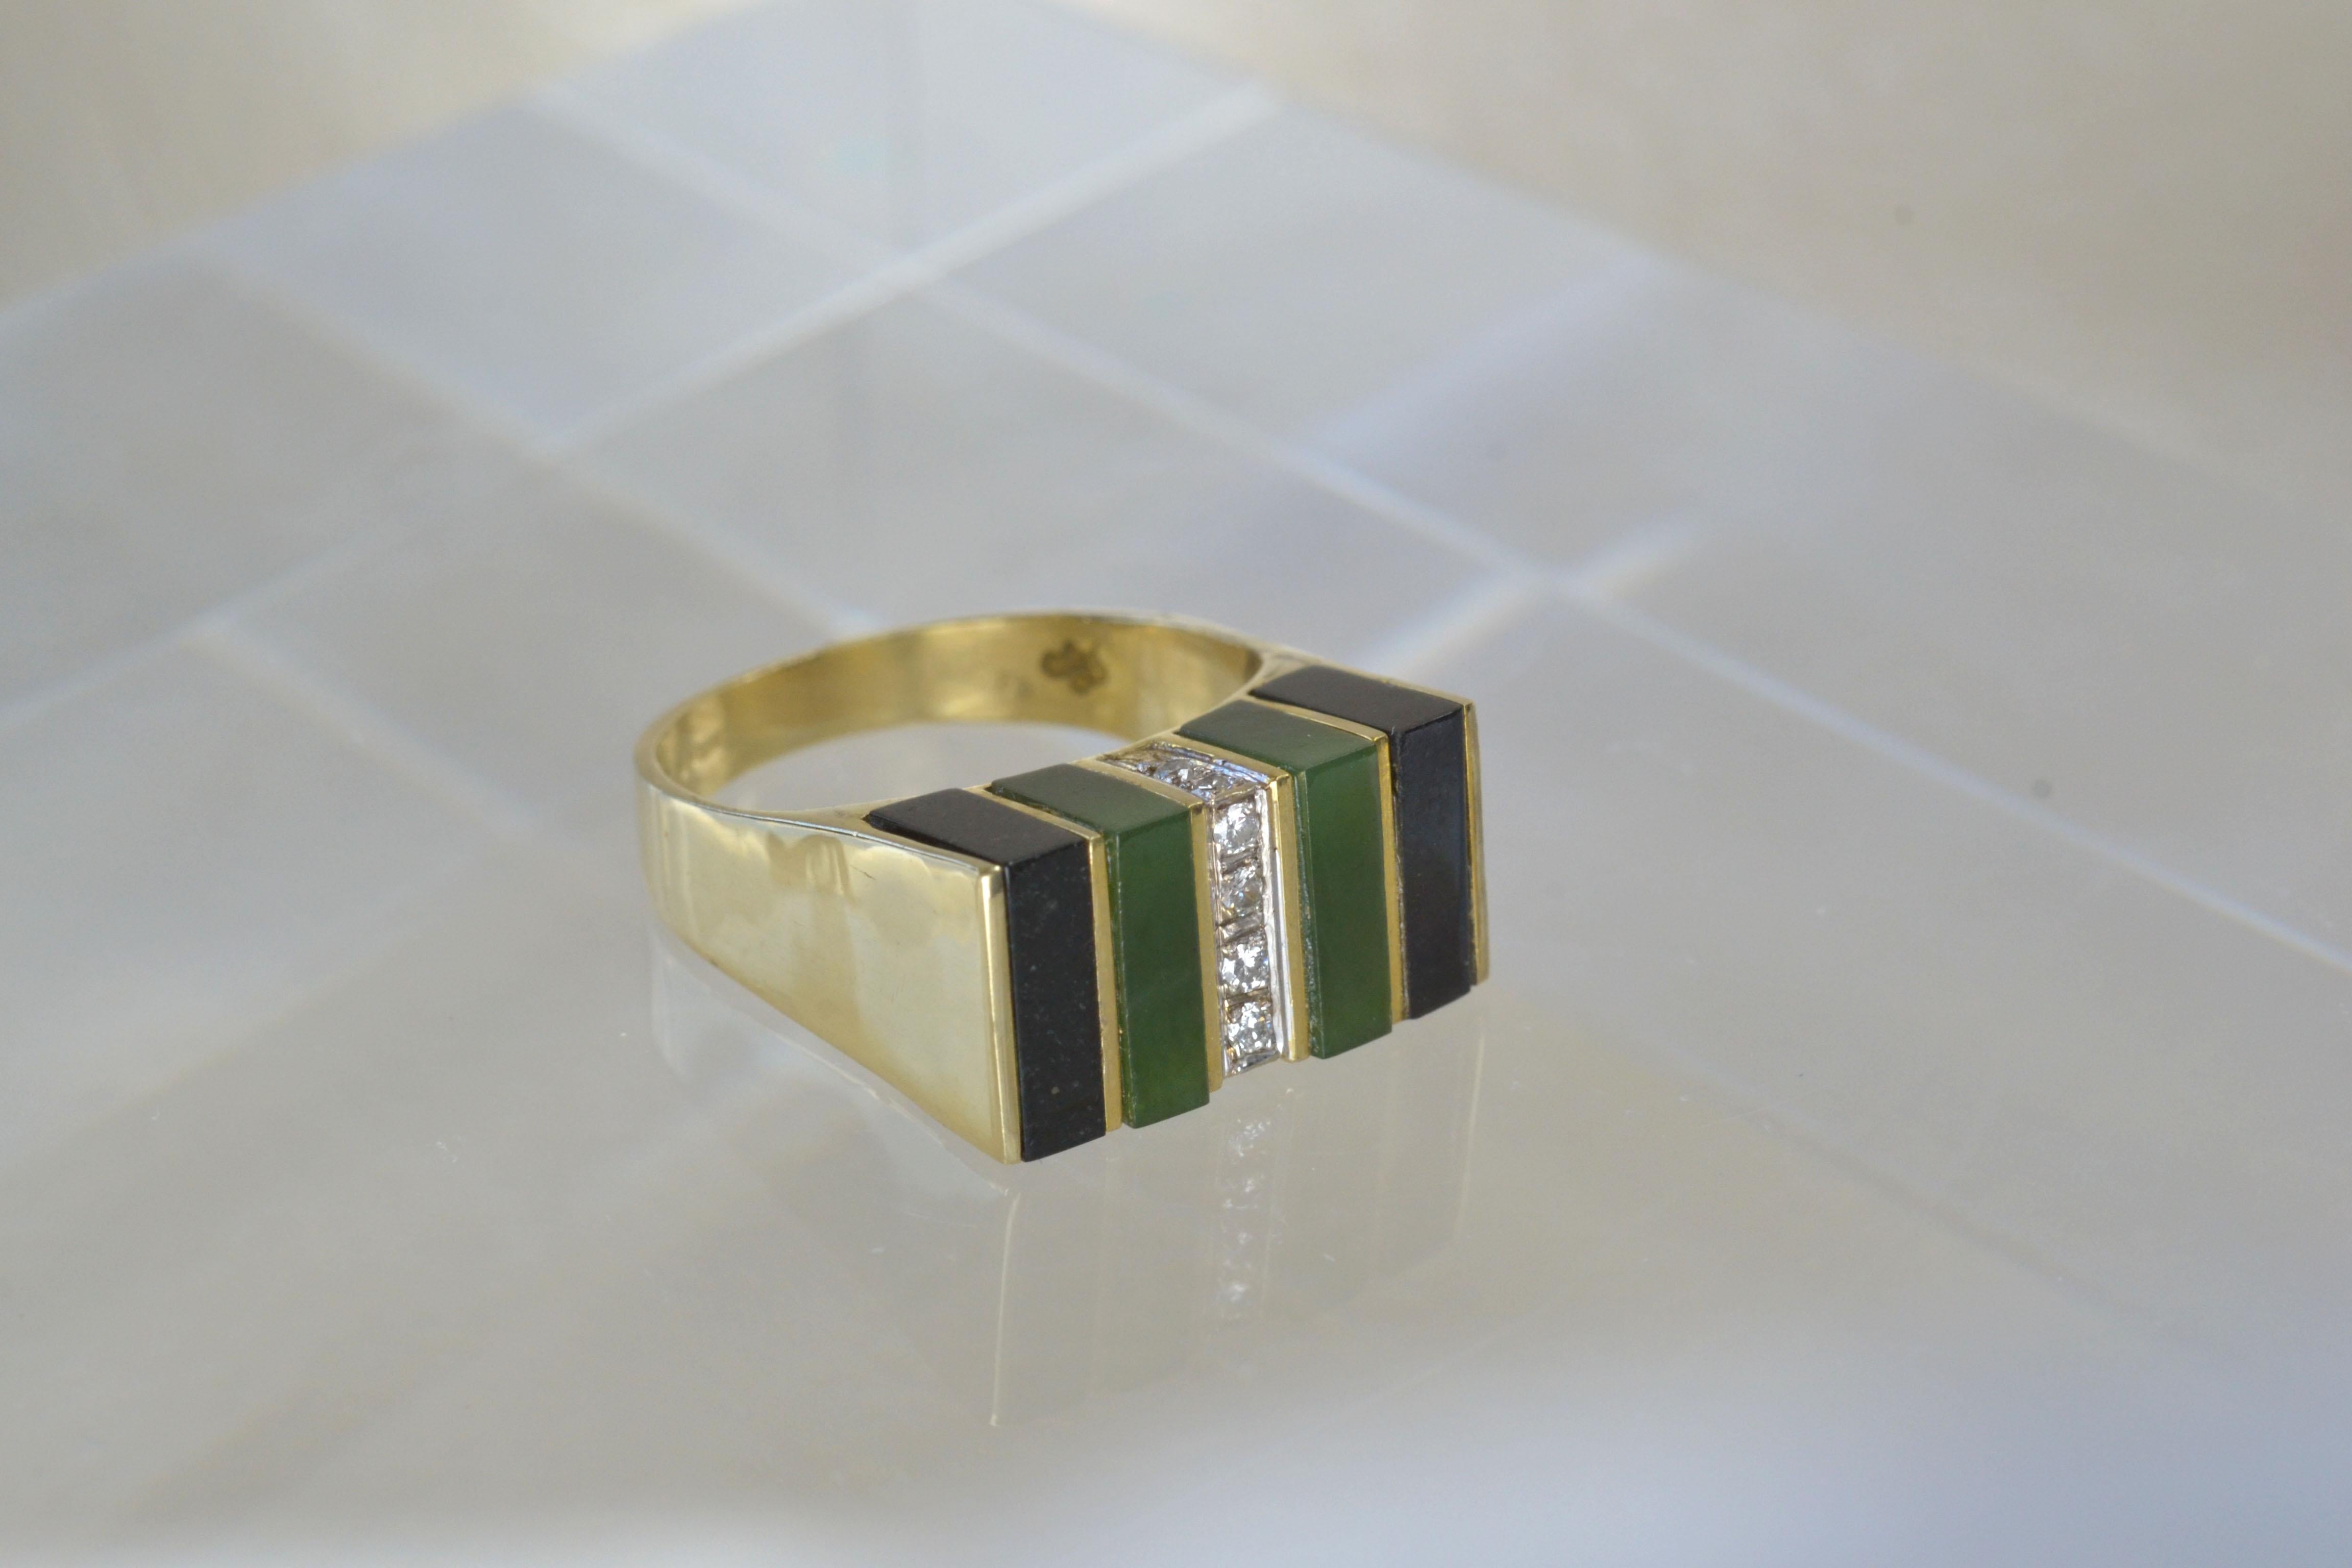 Mixed Cut Vintage 14k Gold Malachite and Onyx Striped Ring with Diamonds, One-of-a-kind For Sale